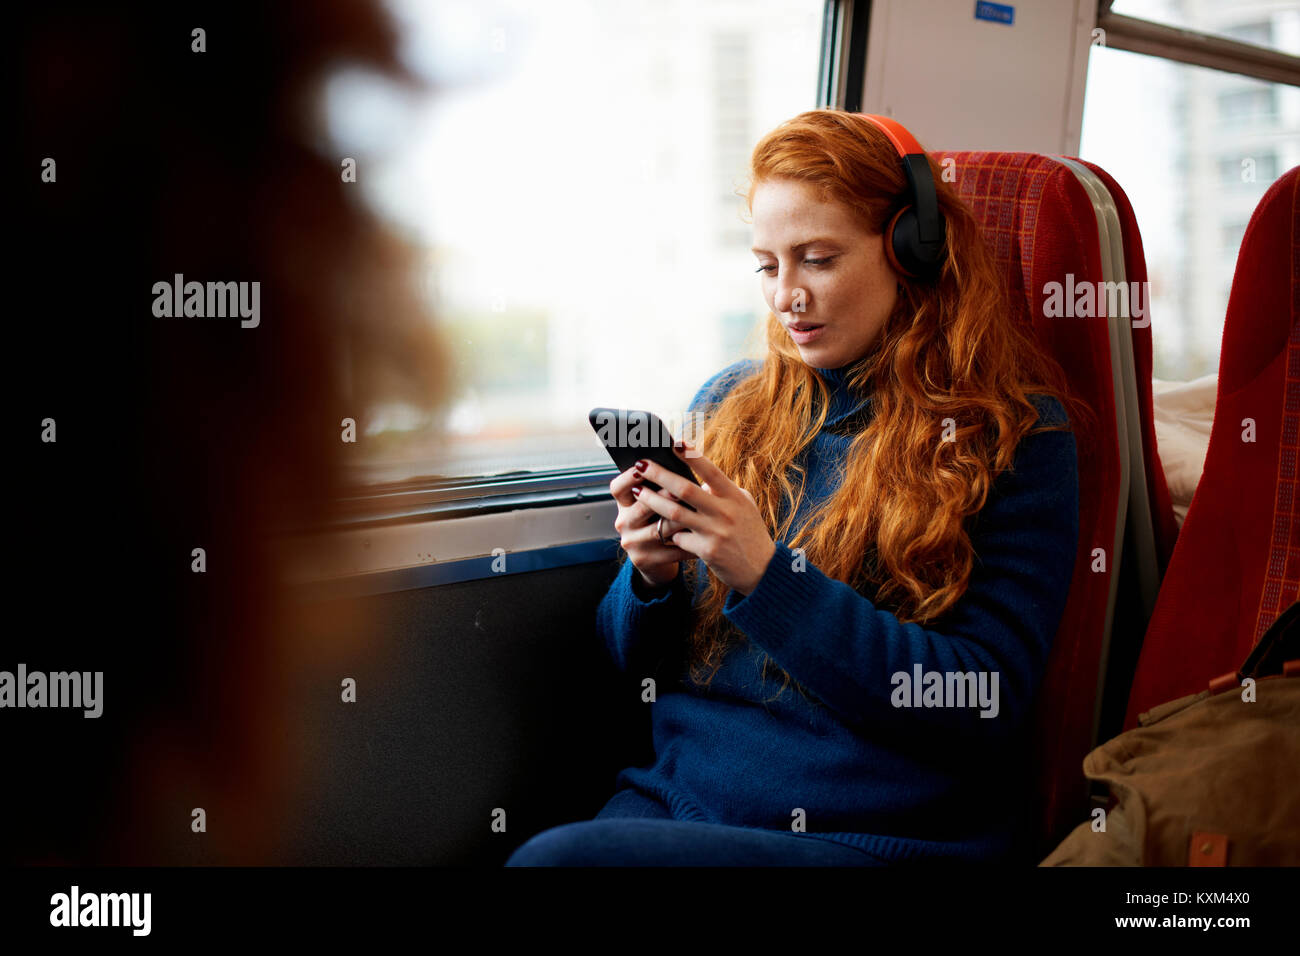 Woman on train listening to music on mobile phone with headphones,London Stock Photo